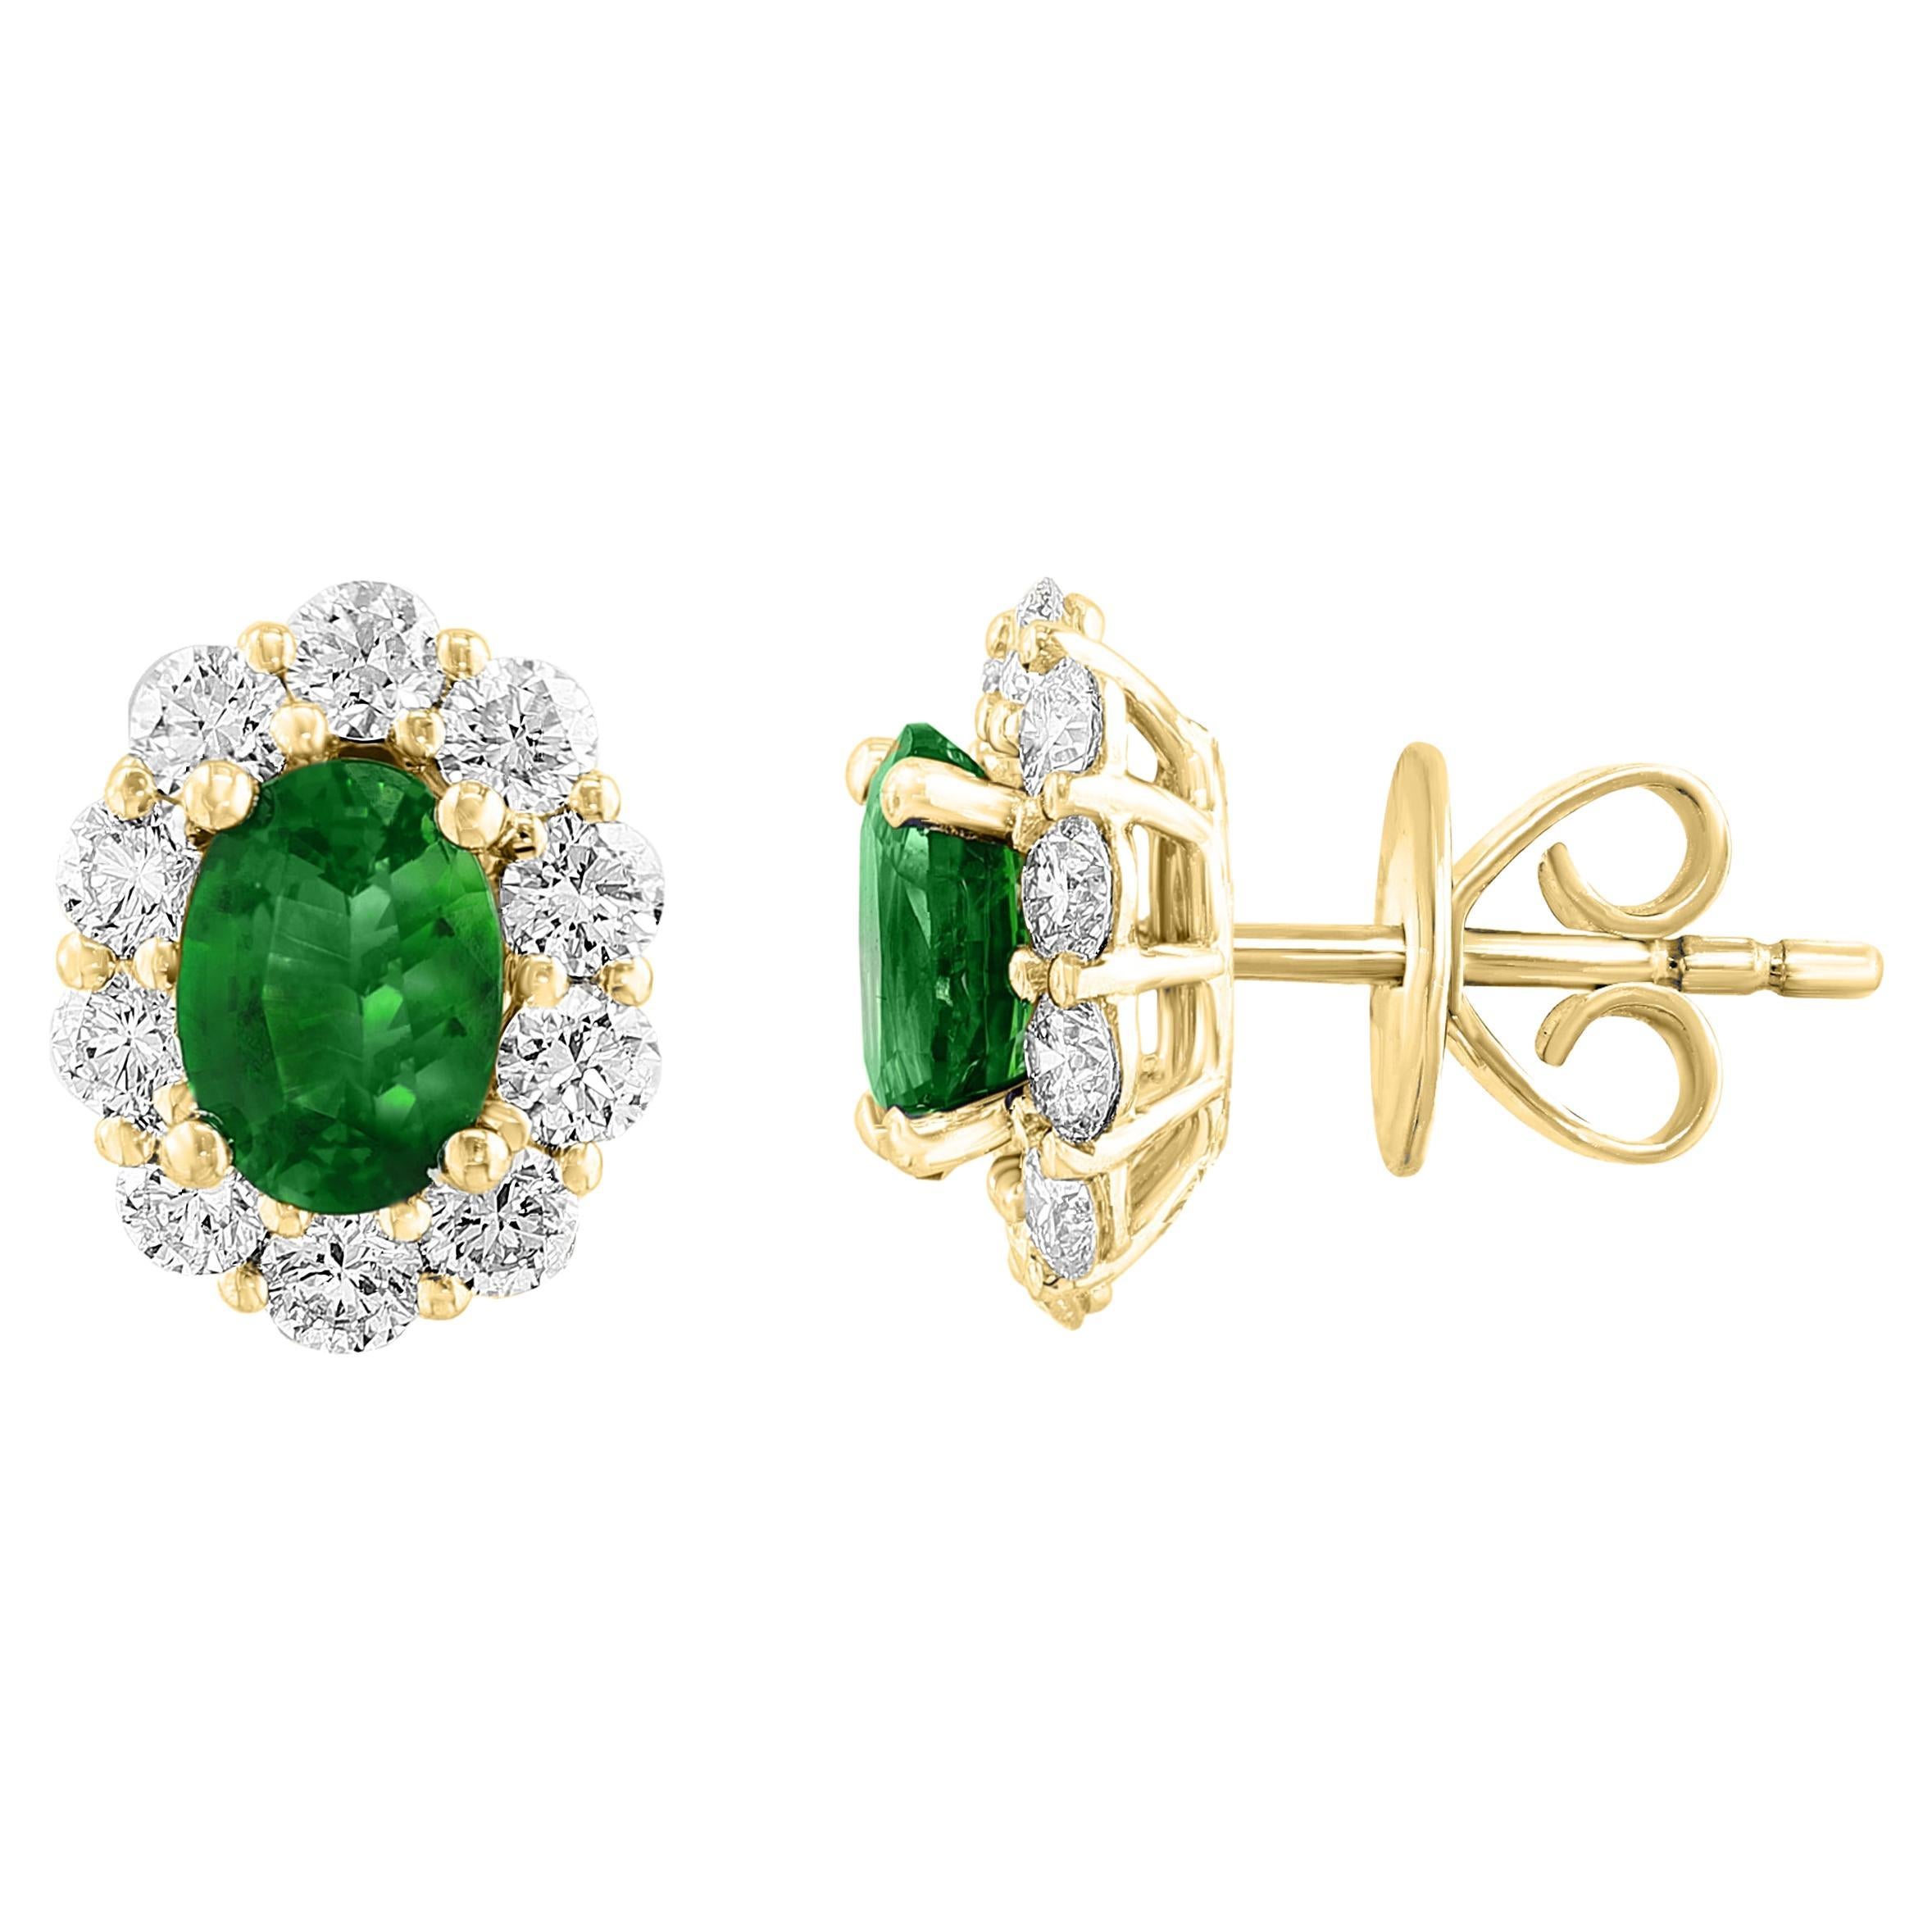 1.28 Carat Oval Cut Emerald and Diamond Stud Earrings in 18K Yellow Gold For Sale